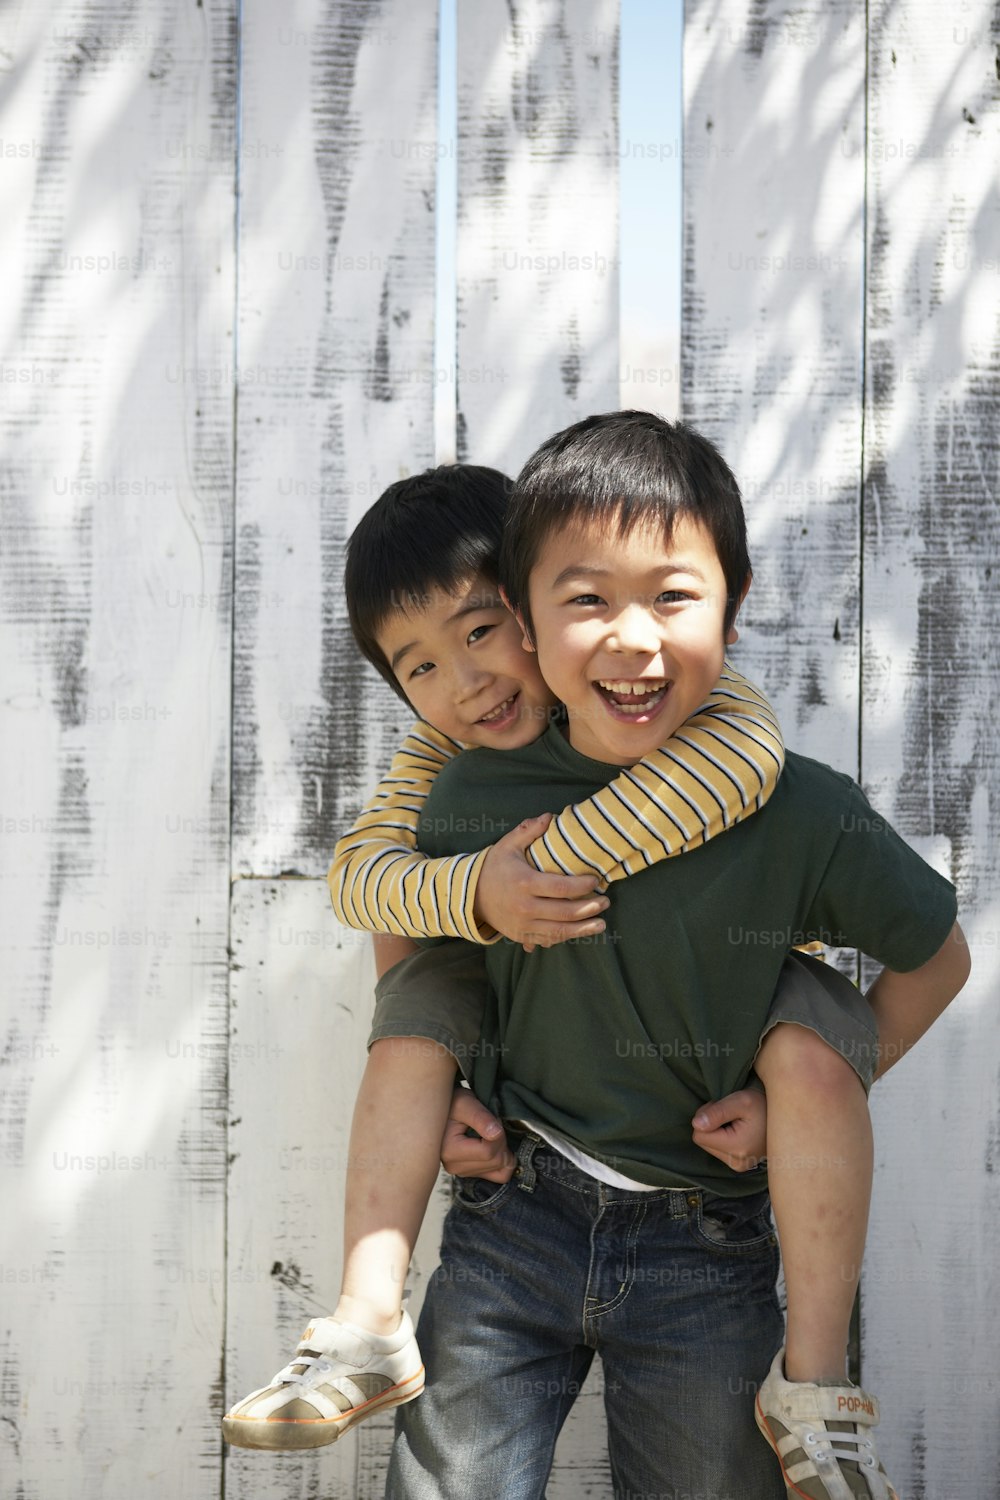 two young boys hugging each other in front of a fence